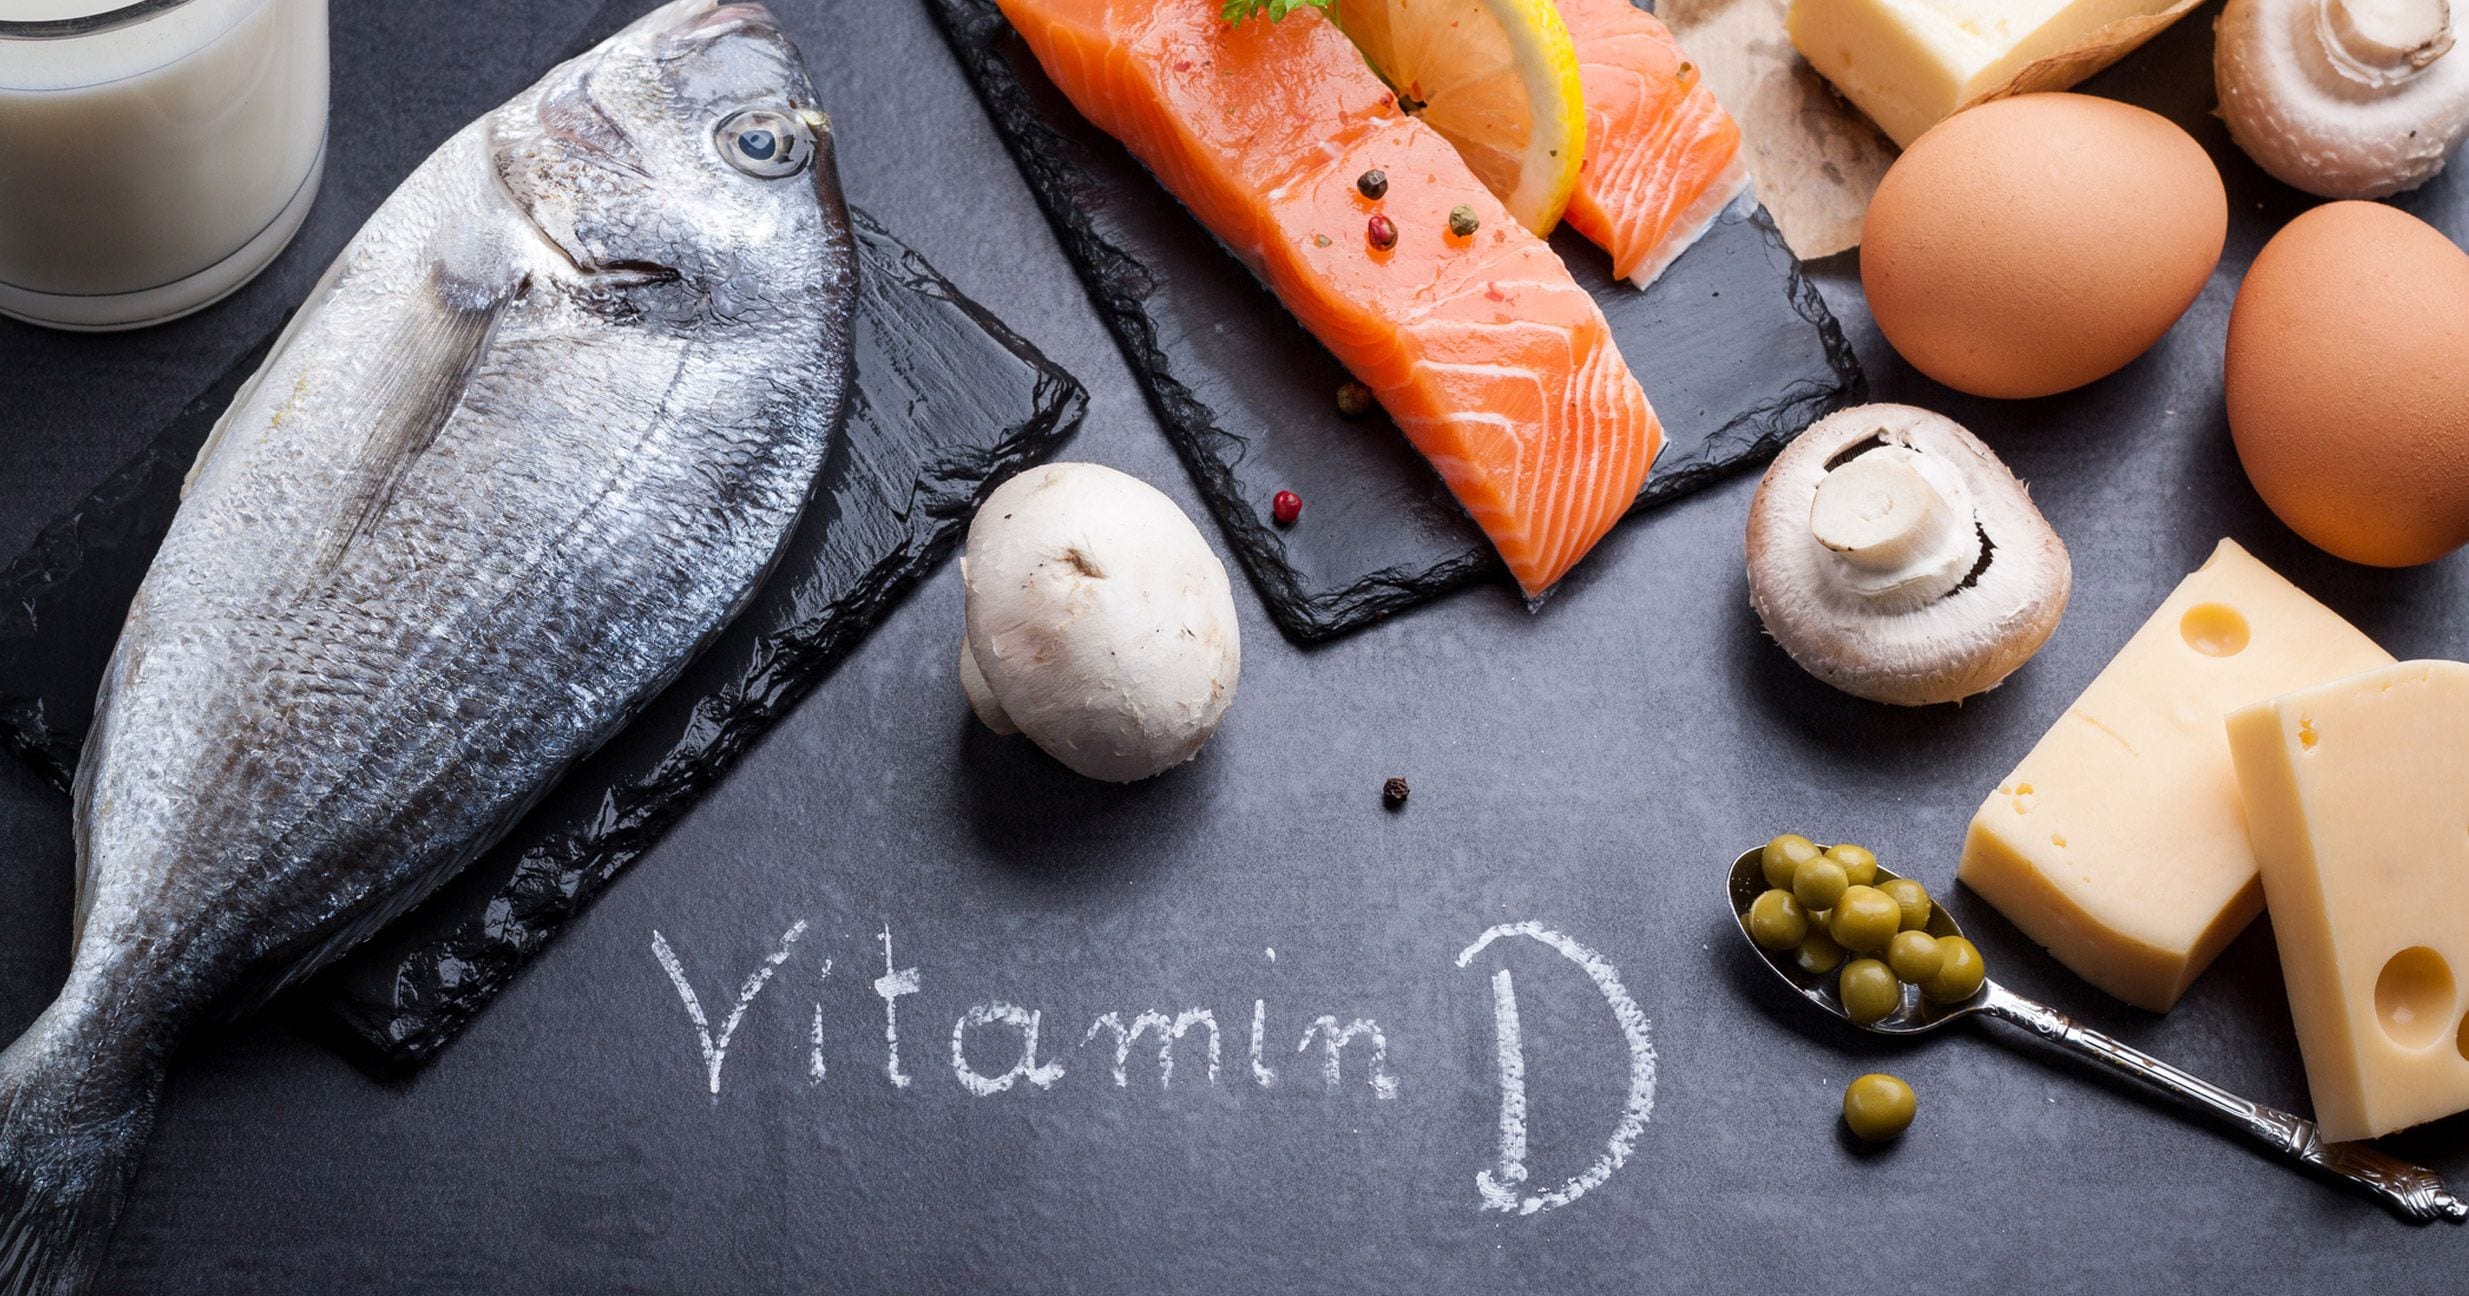 Vitamin D rich foods to help protect against heart disease